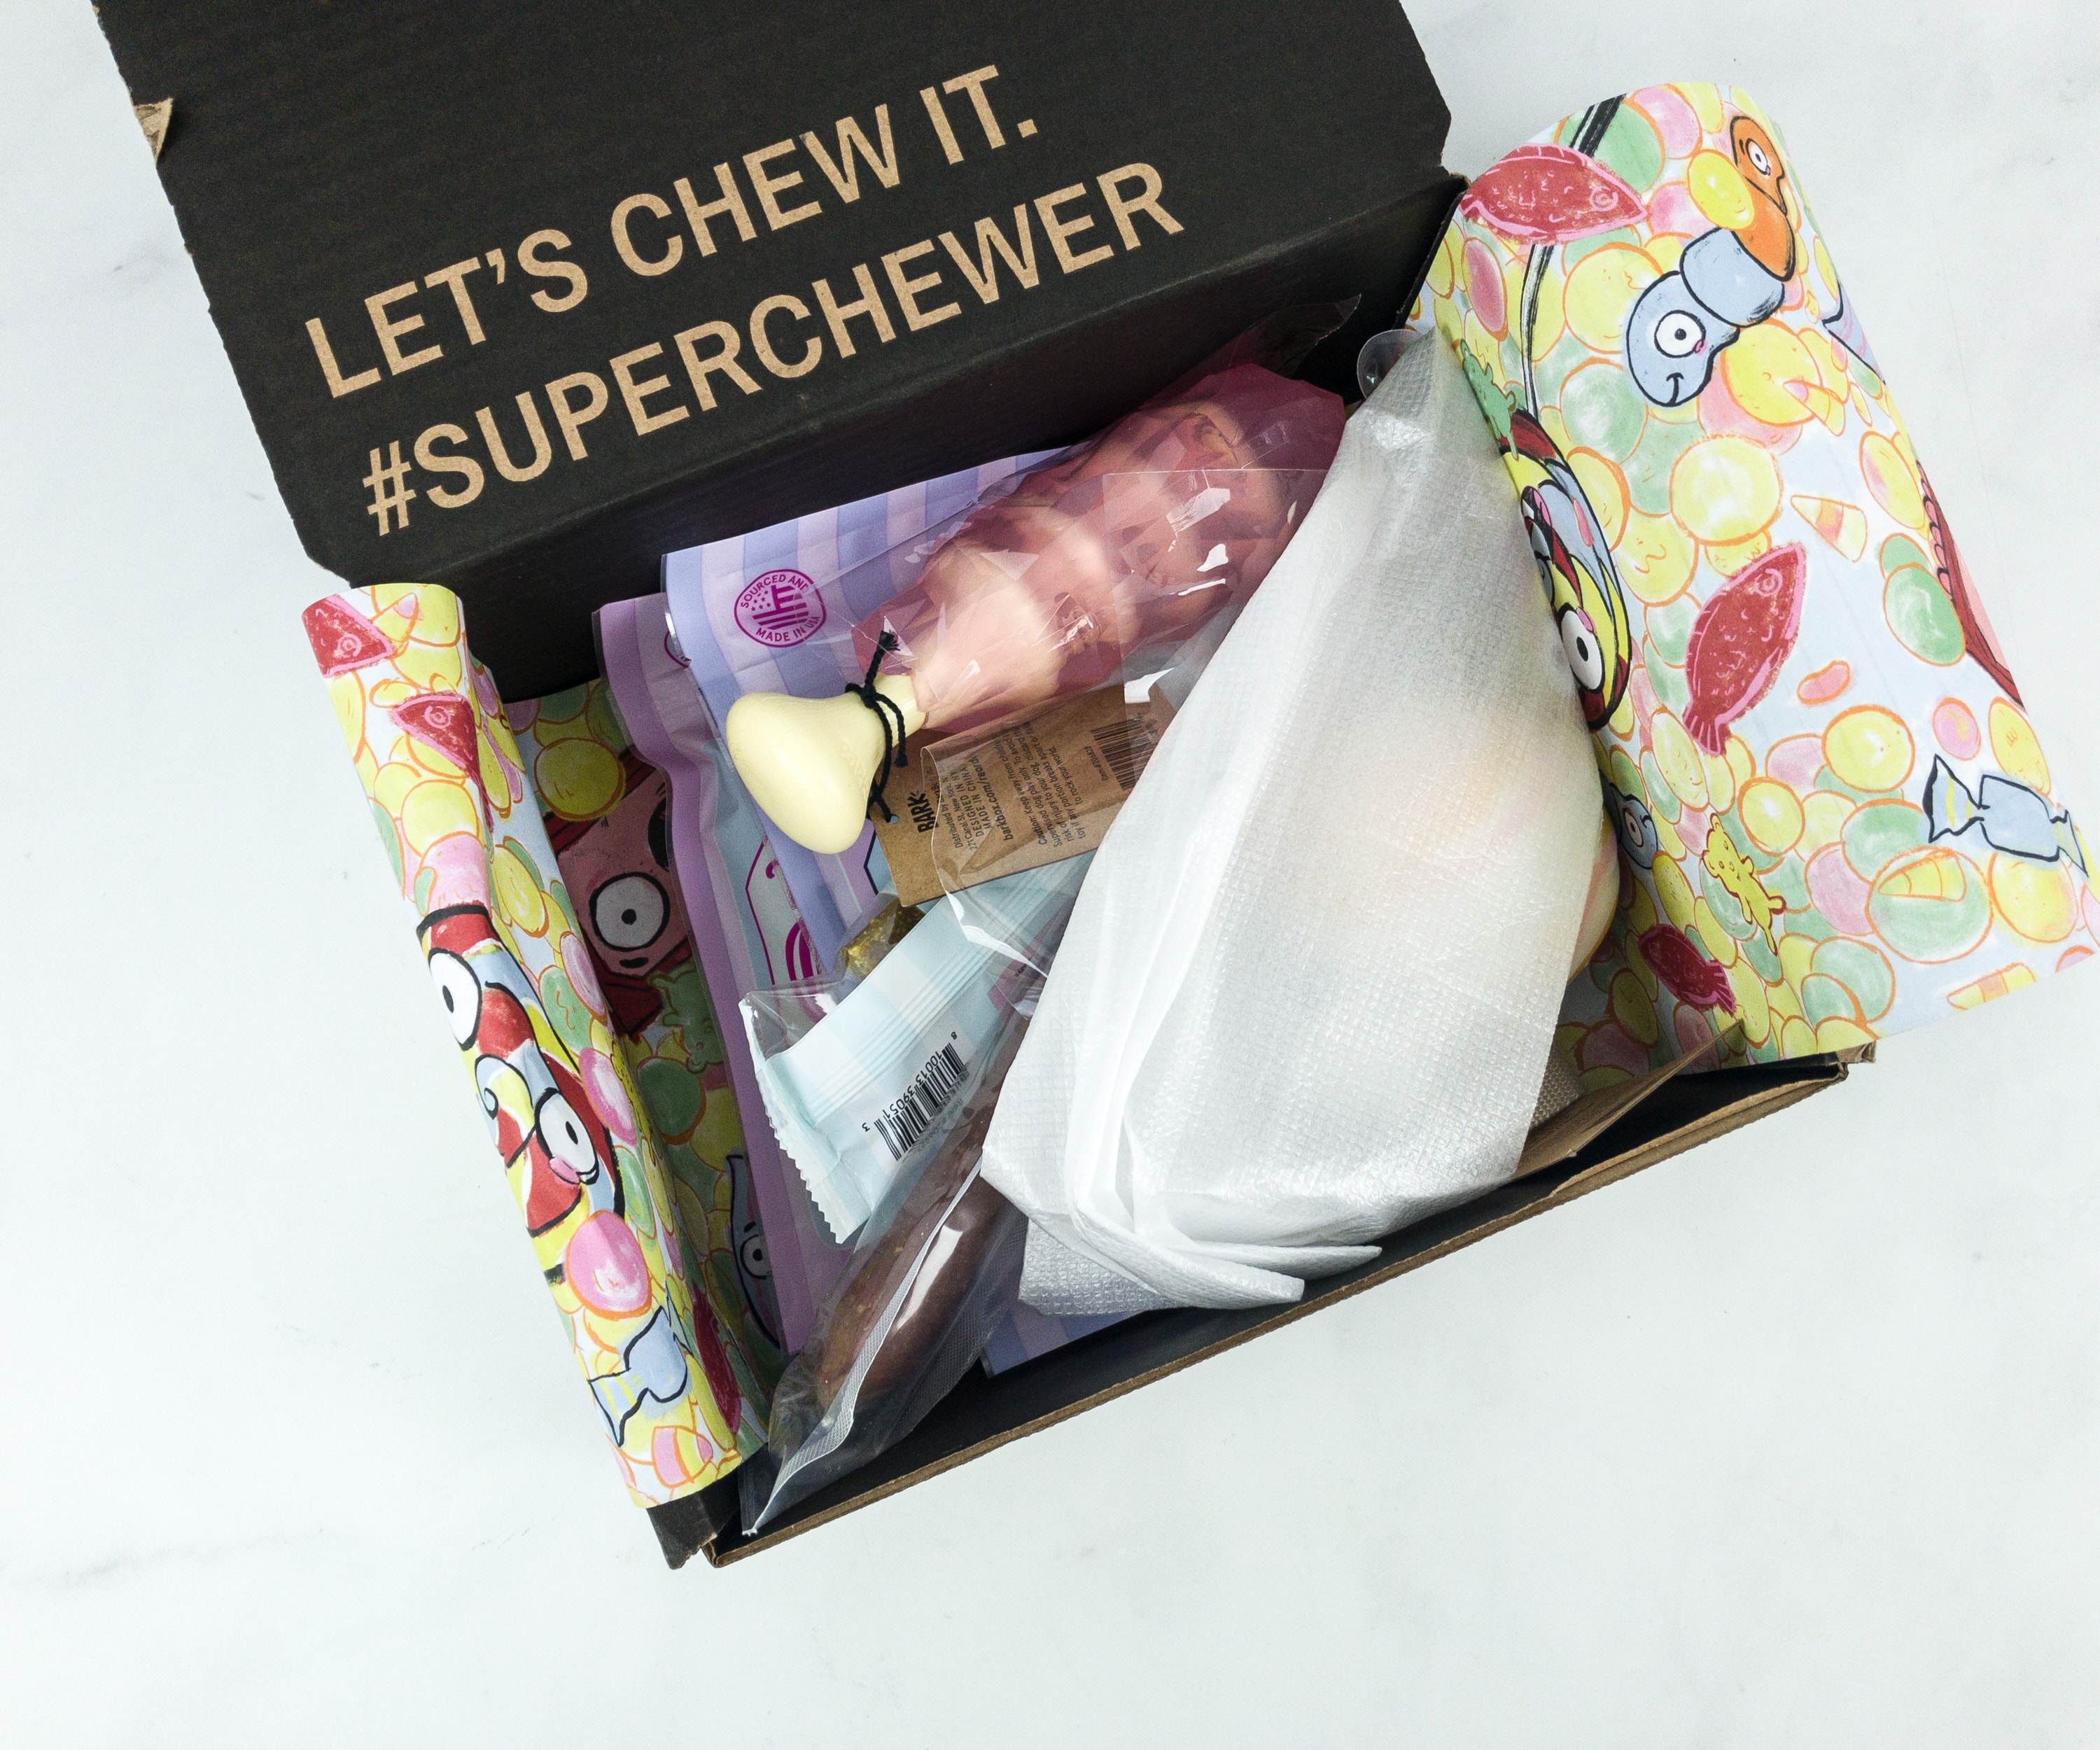 Super Chewer BarkBox - Our friends at YETI made these limited-edition bowls  just for us, so we're giving every new multi-month subscription a FREE one  🥰 Only available with the link below